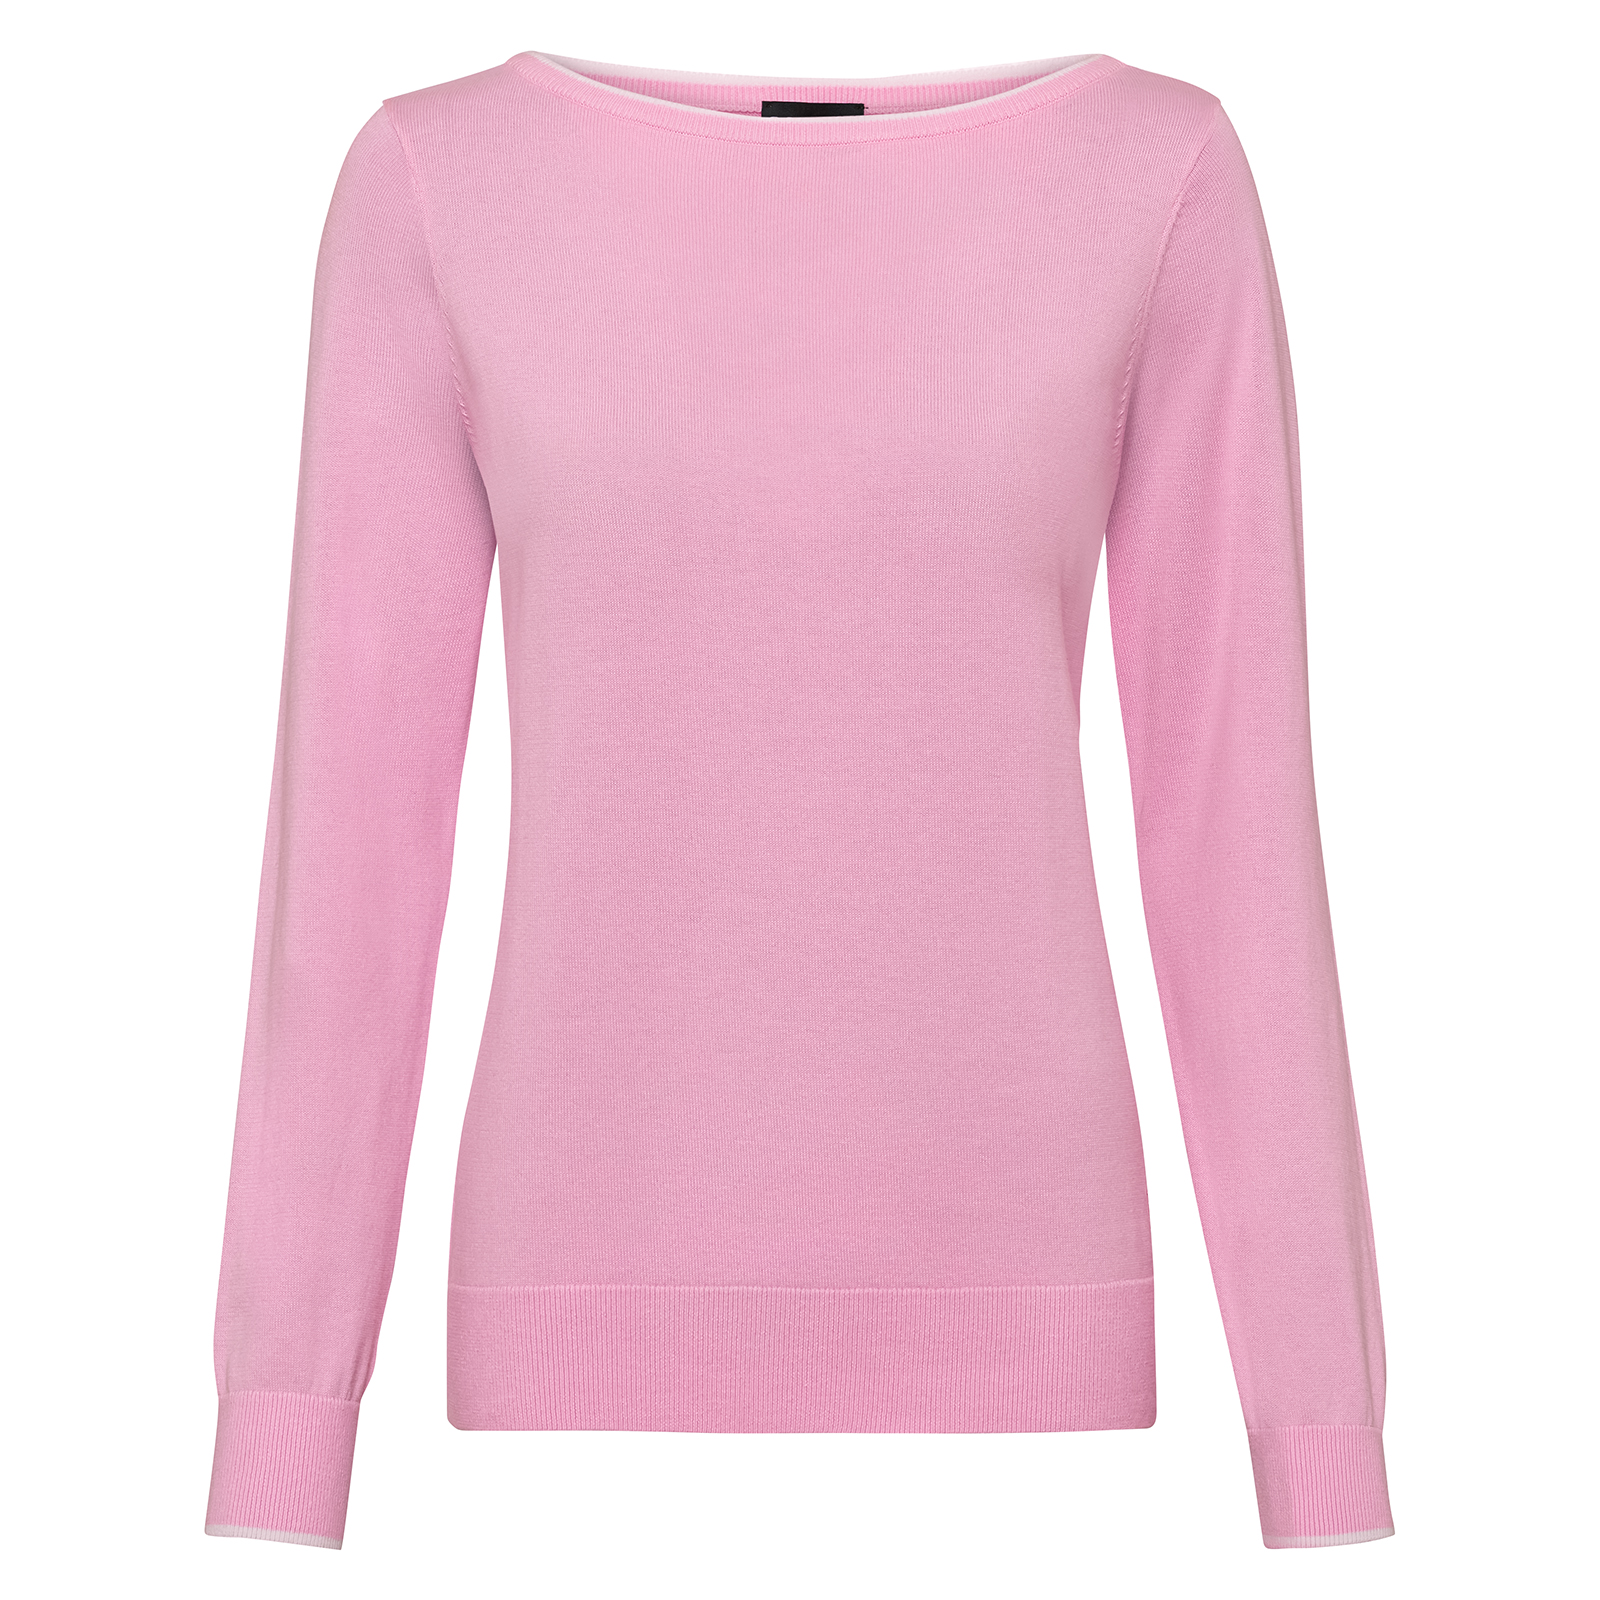 Ladies' knitted crew neck sweater in Pima cotton 